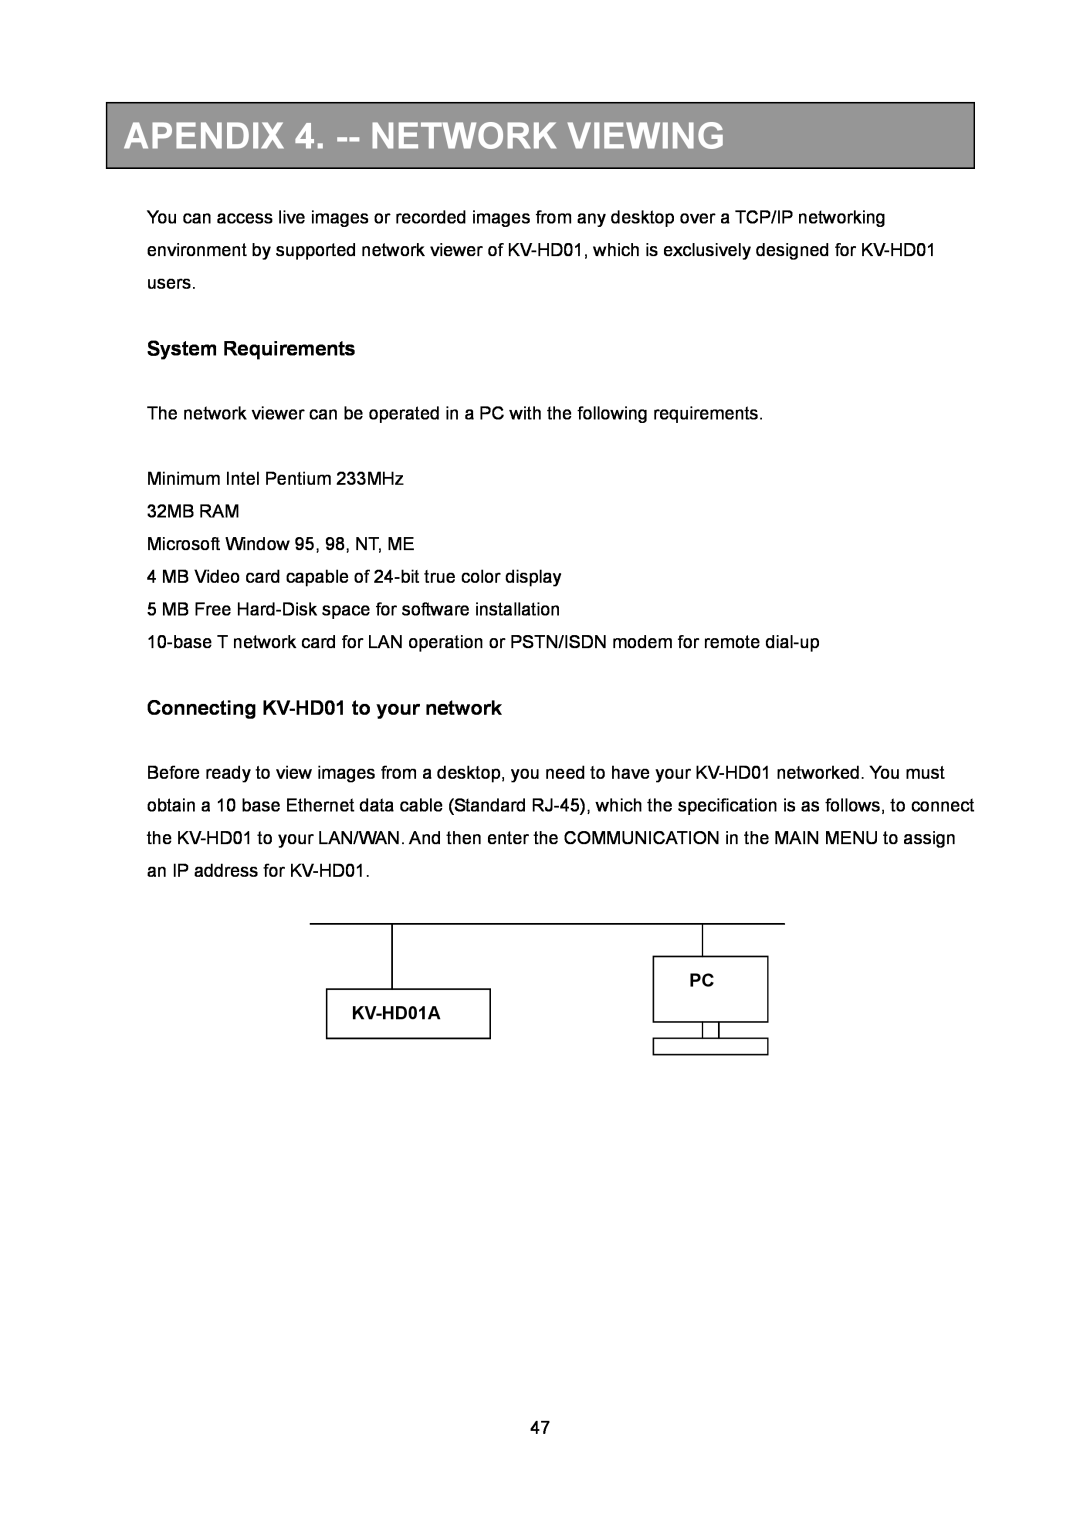 Toshiba KV-HD01A manual APENDIX 4. -- NETWORK VIEWING, System Requirements, Connecting KV-HD01 to your network 